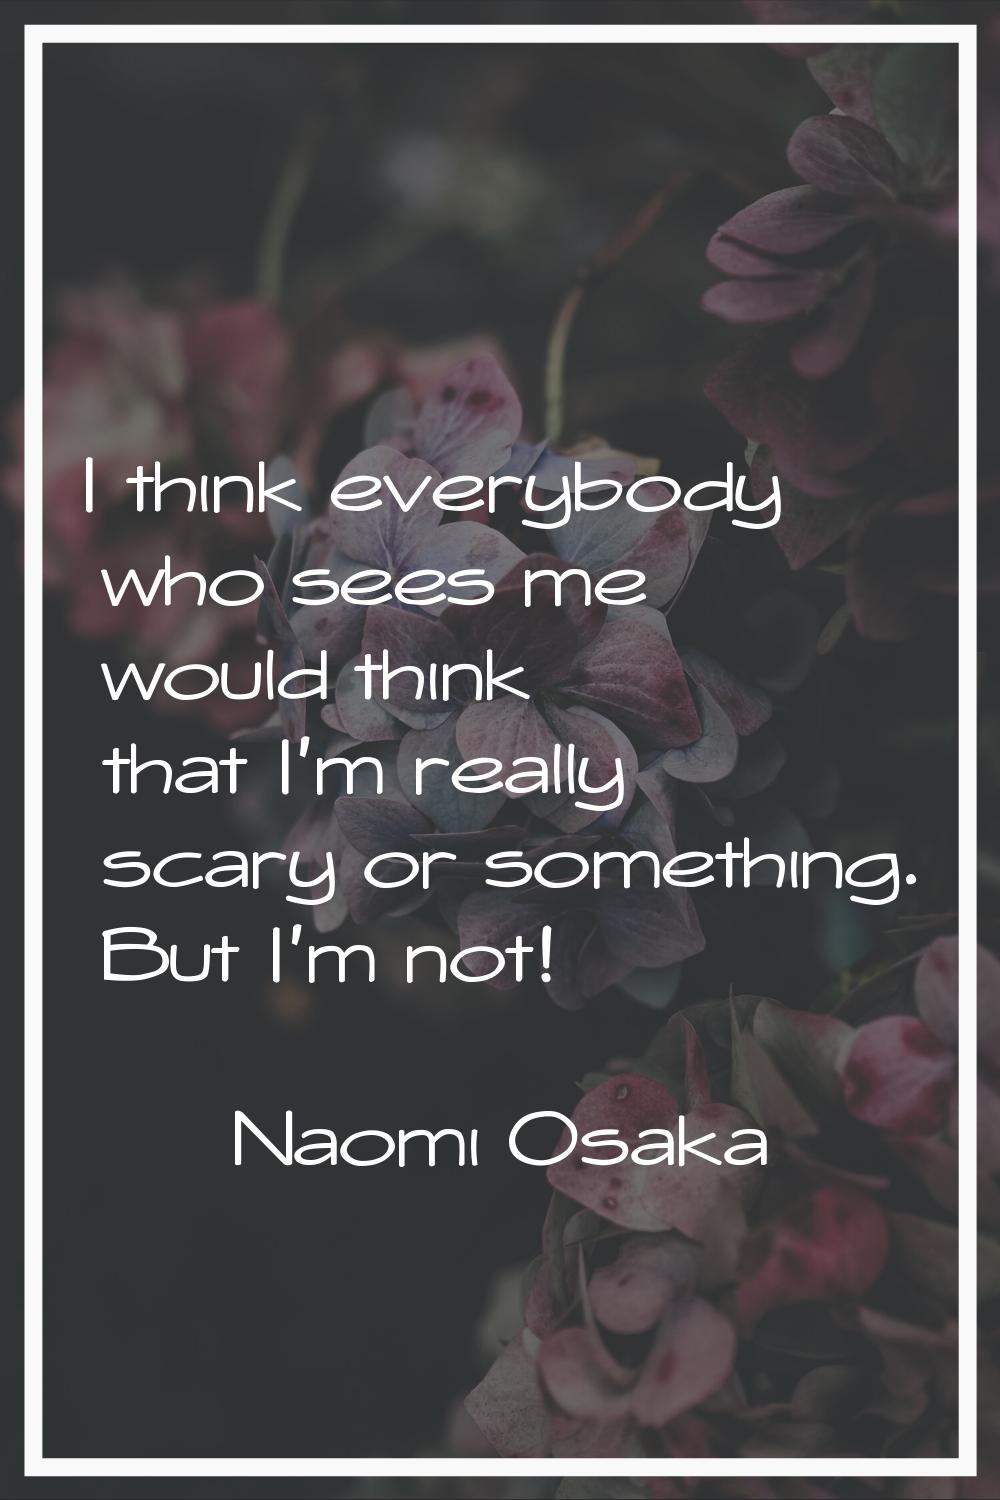 I think everybody who sees me would think that I'm really scary or something. But I'm not!